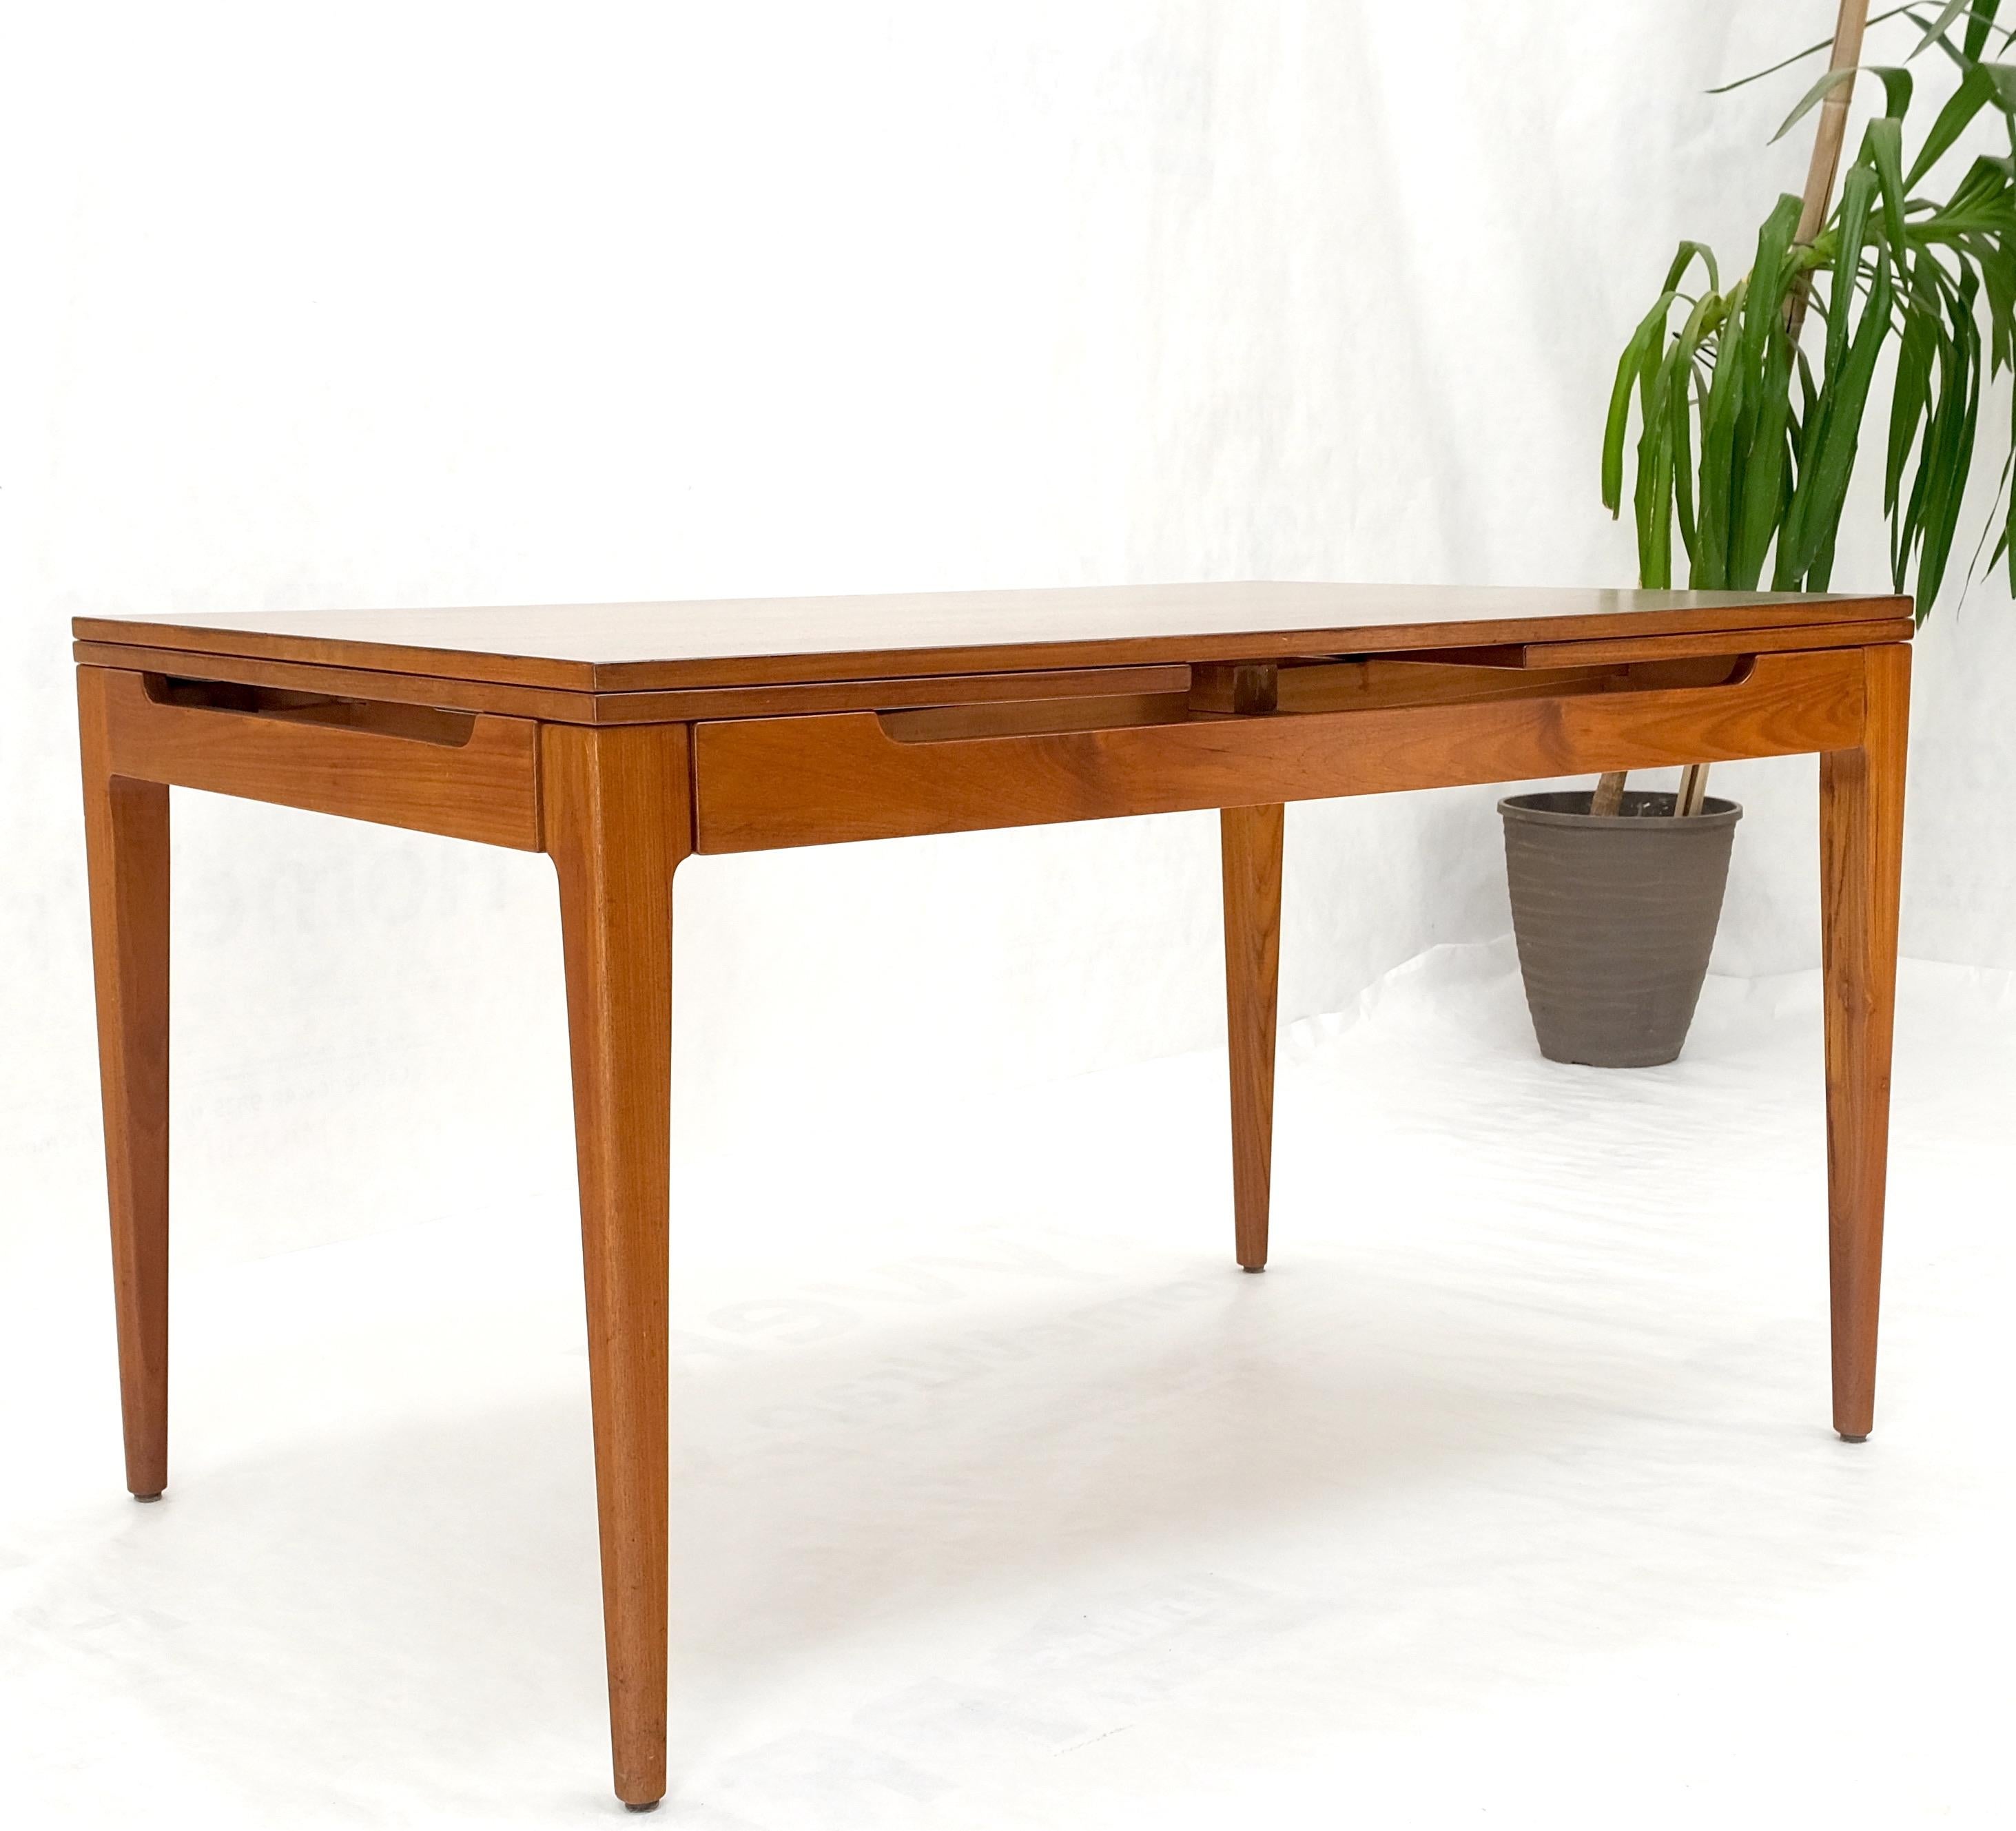 Danish Mid-Century Modern Teak Refectory Dining Table Two Leafs Mint! For Sale 8